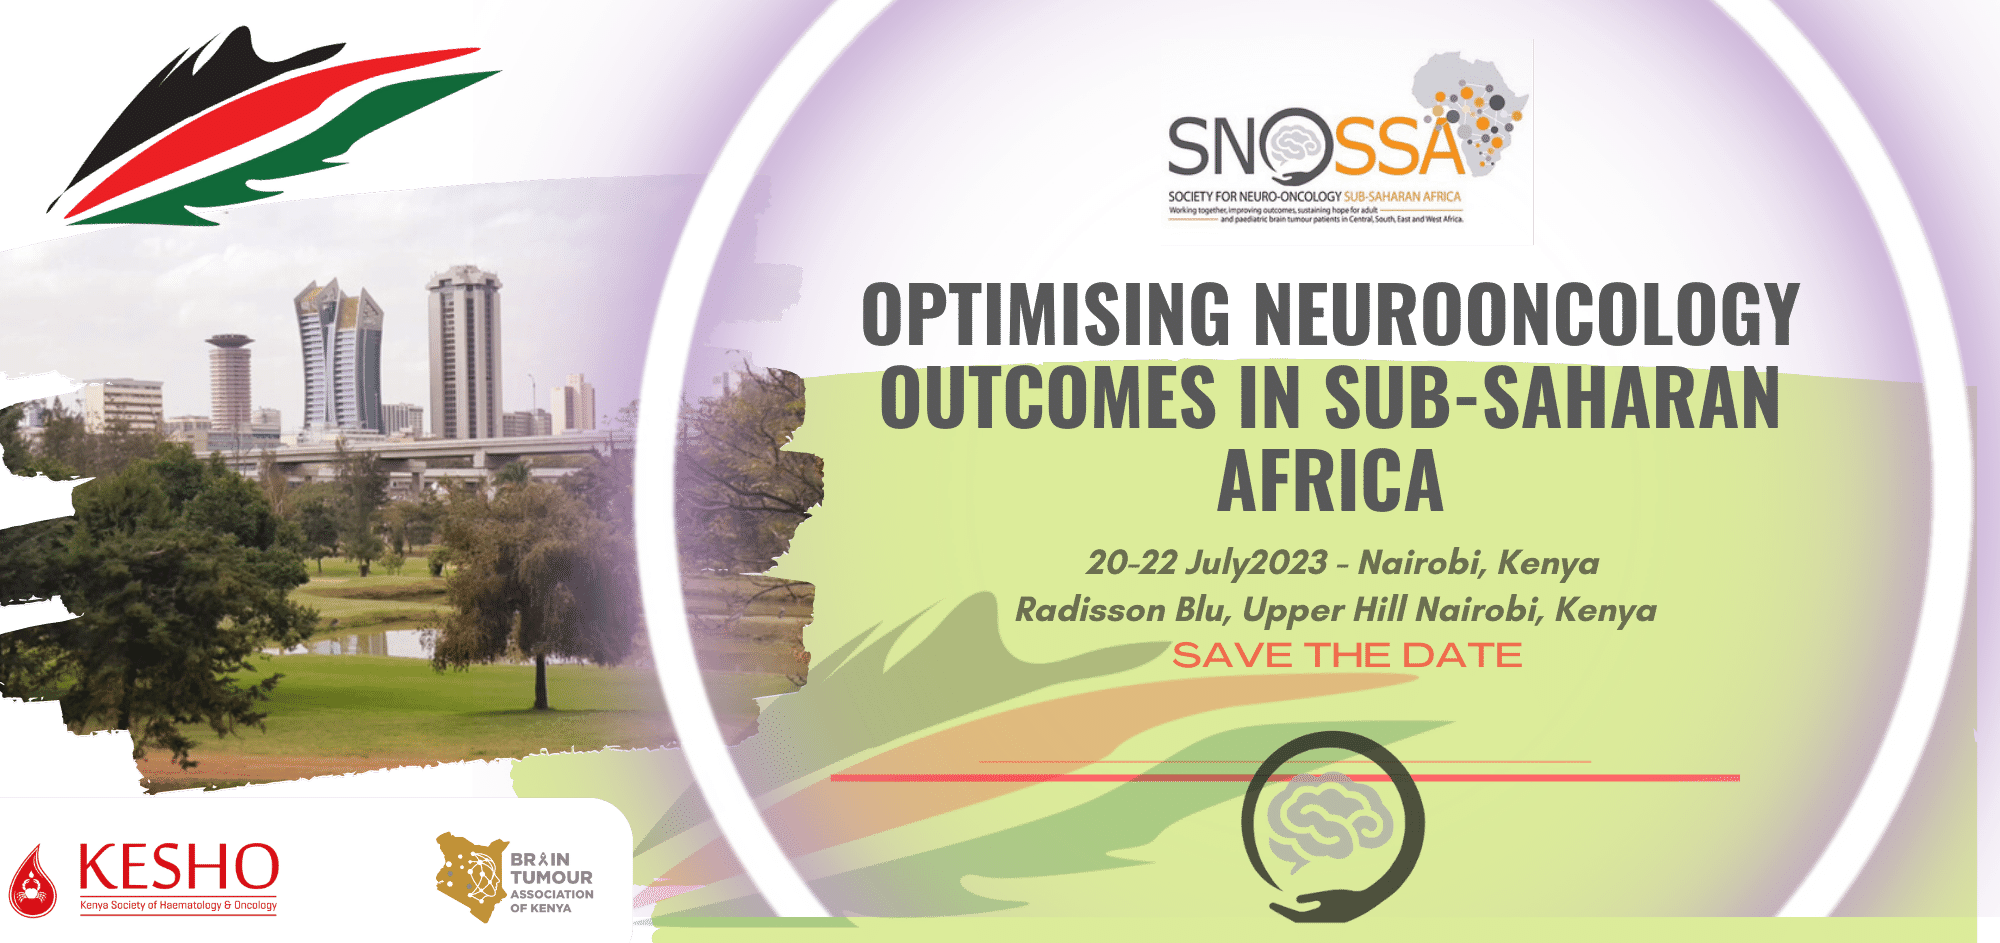 The Society For Neuro-Oncology Sub-Saharan Africa in Collaboration with KESHO